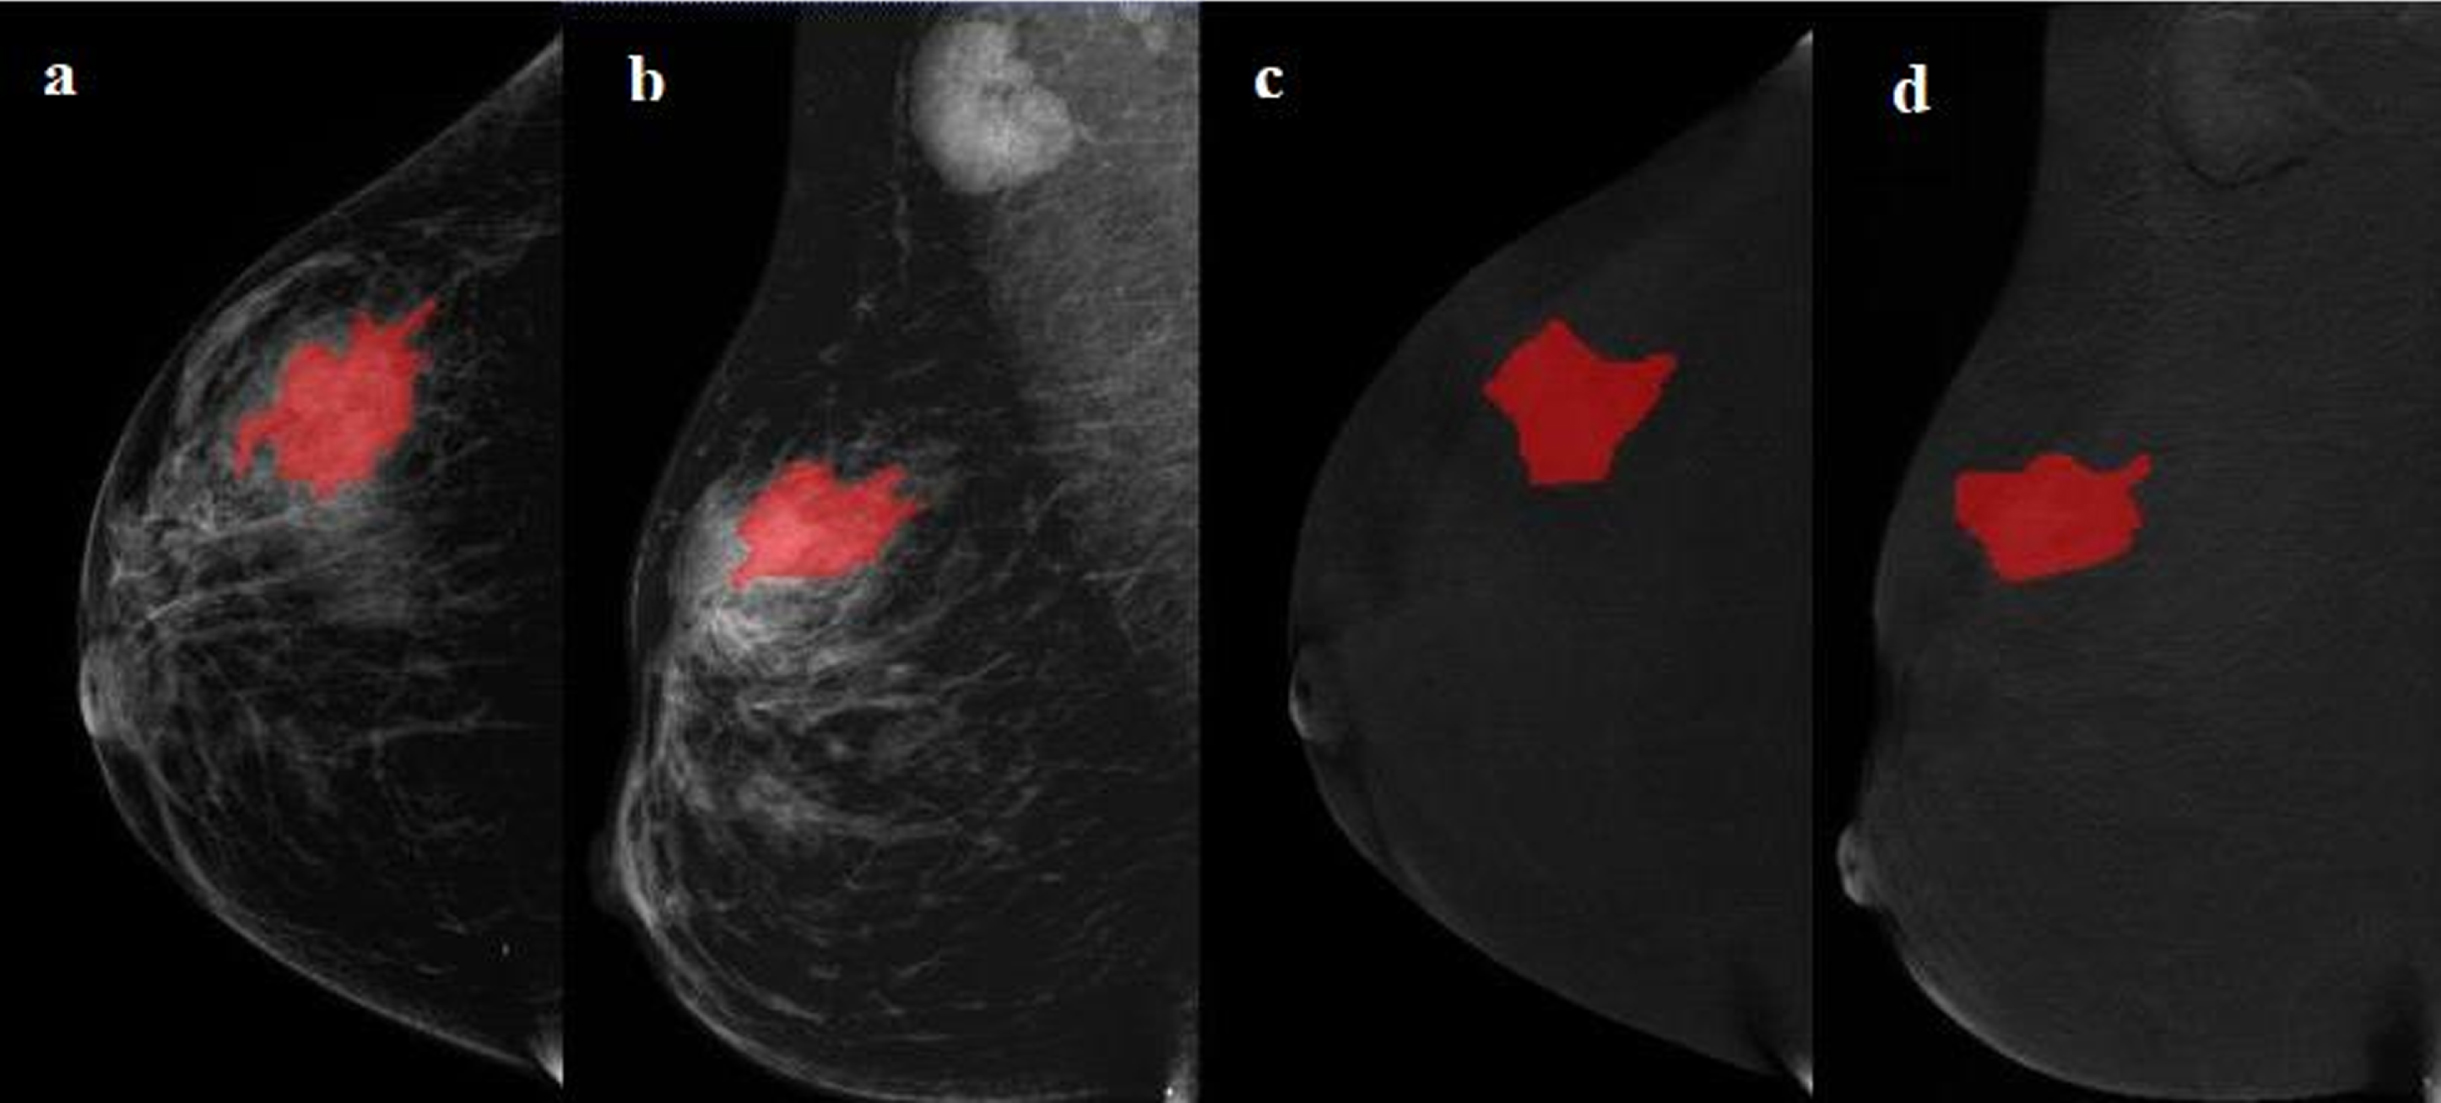 Examples of regions of interest (ROIs) segmentation on contrast-enhanced spectral mammography (CESM) images. (A, C) The low-energy and recombined images with cranial caudal (CC) view. (B, D) The low-energy and recombined images with mediolateral oblique (MLO) view. The ROIs of breast lesions were drawn manually on low-energy and recombined images, respectively.